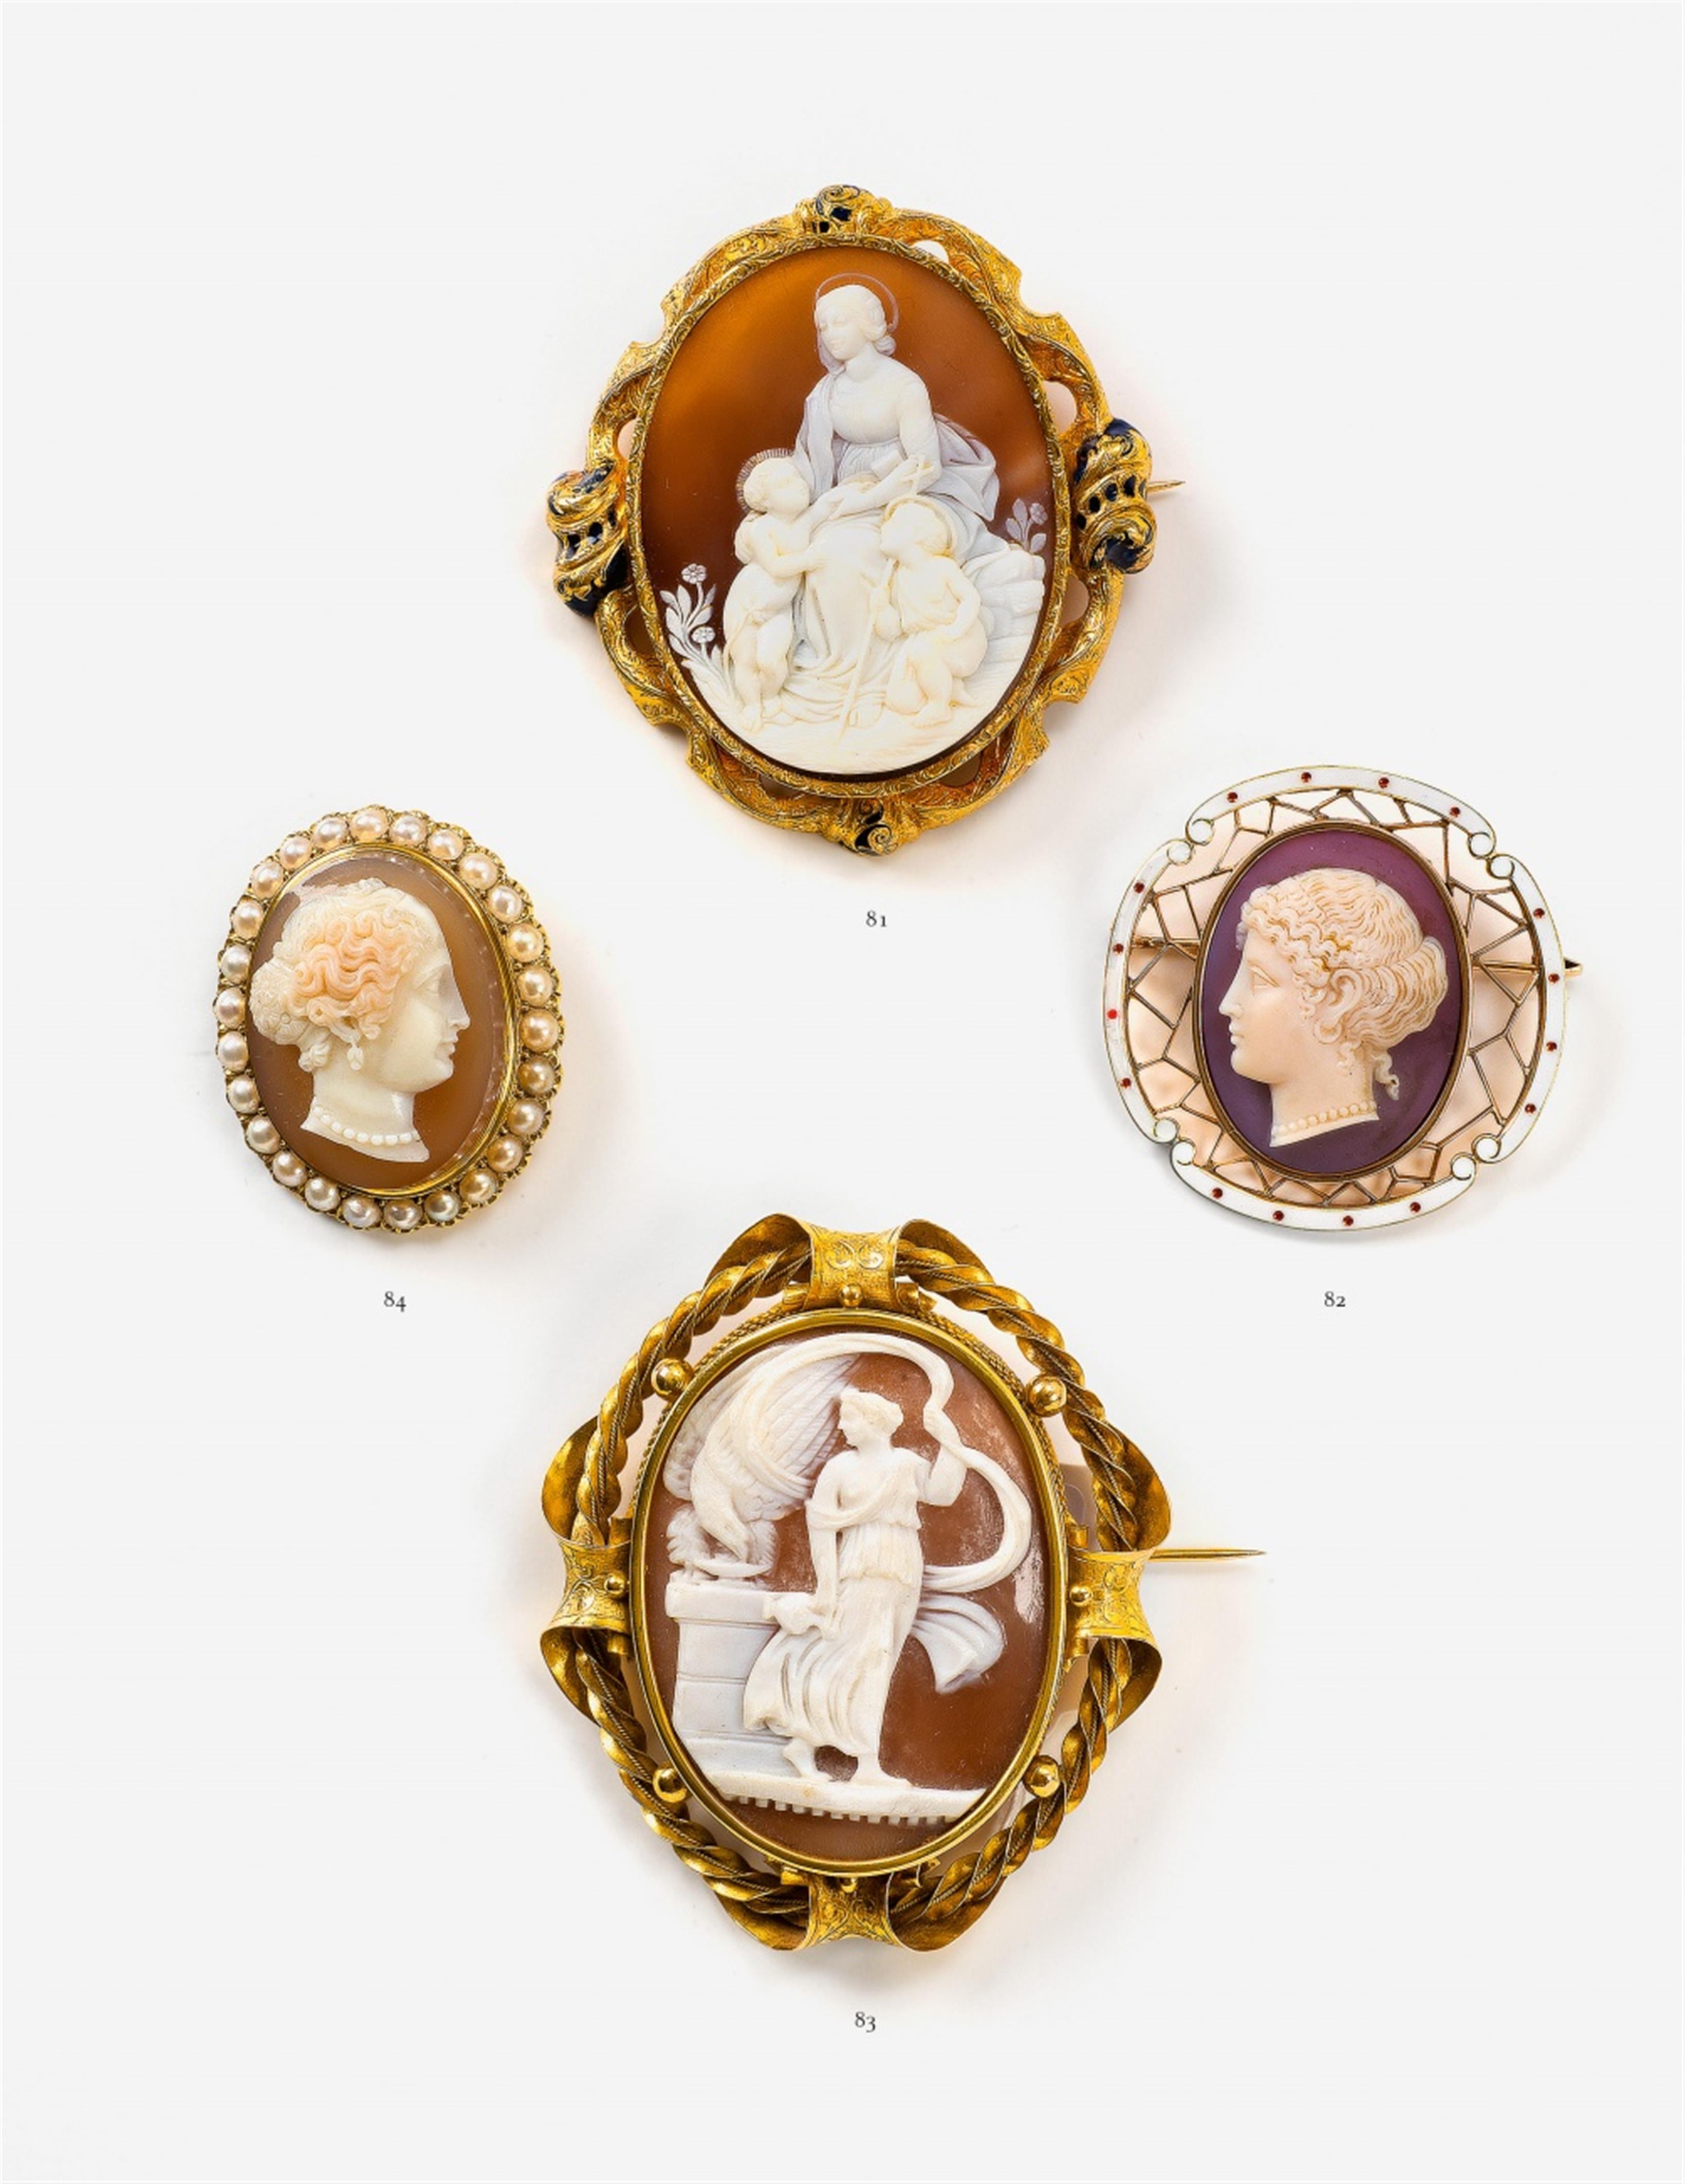 A 12k gold brooch with a shell cameo - image-1